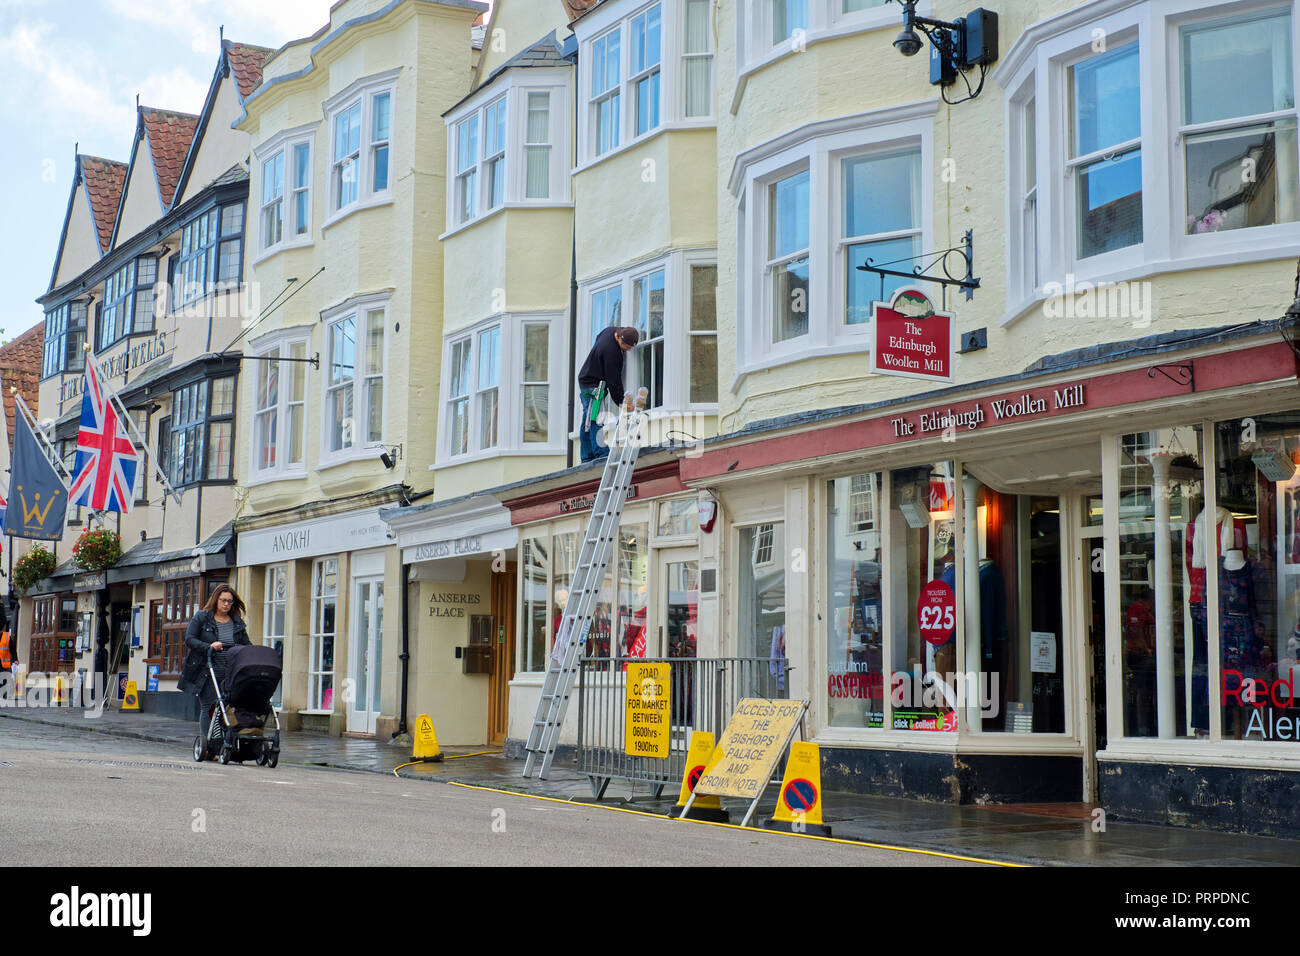 A Window Cleaner cleaning windows on a building in Wells, Somerset, UK Stock Photo